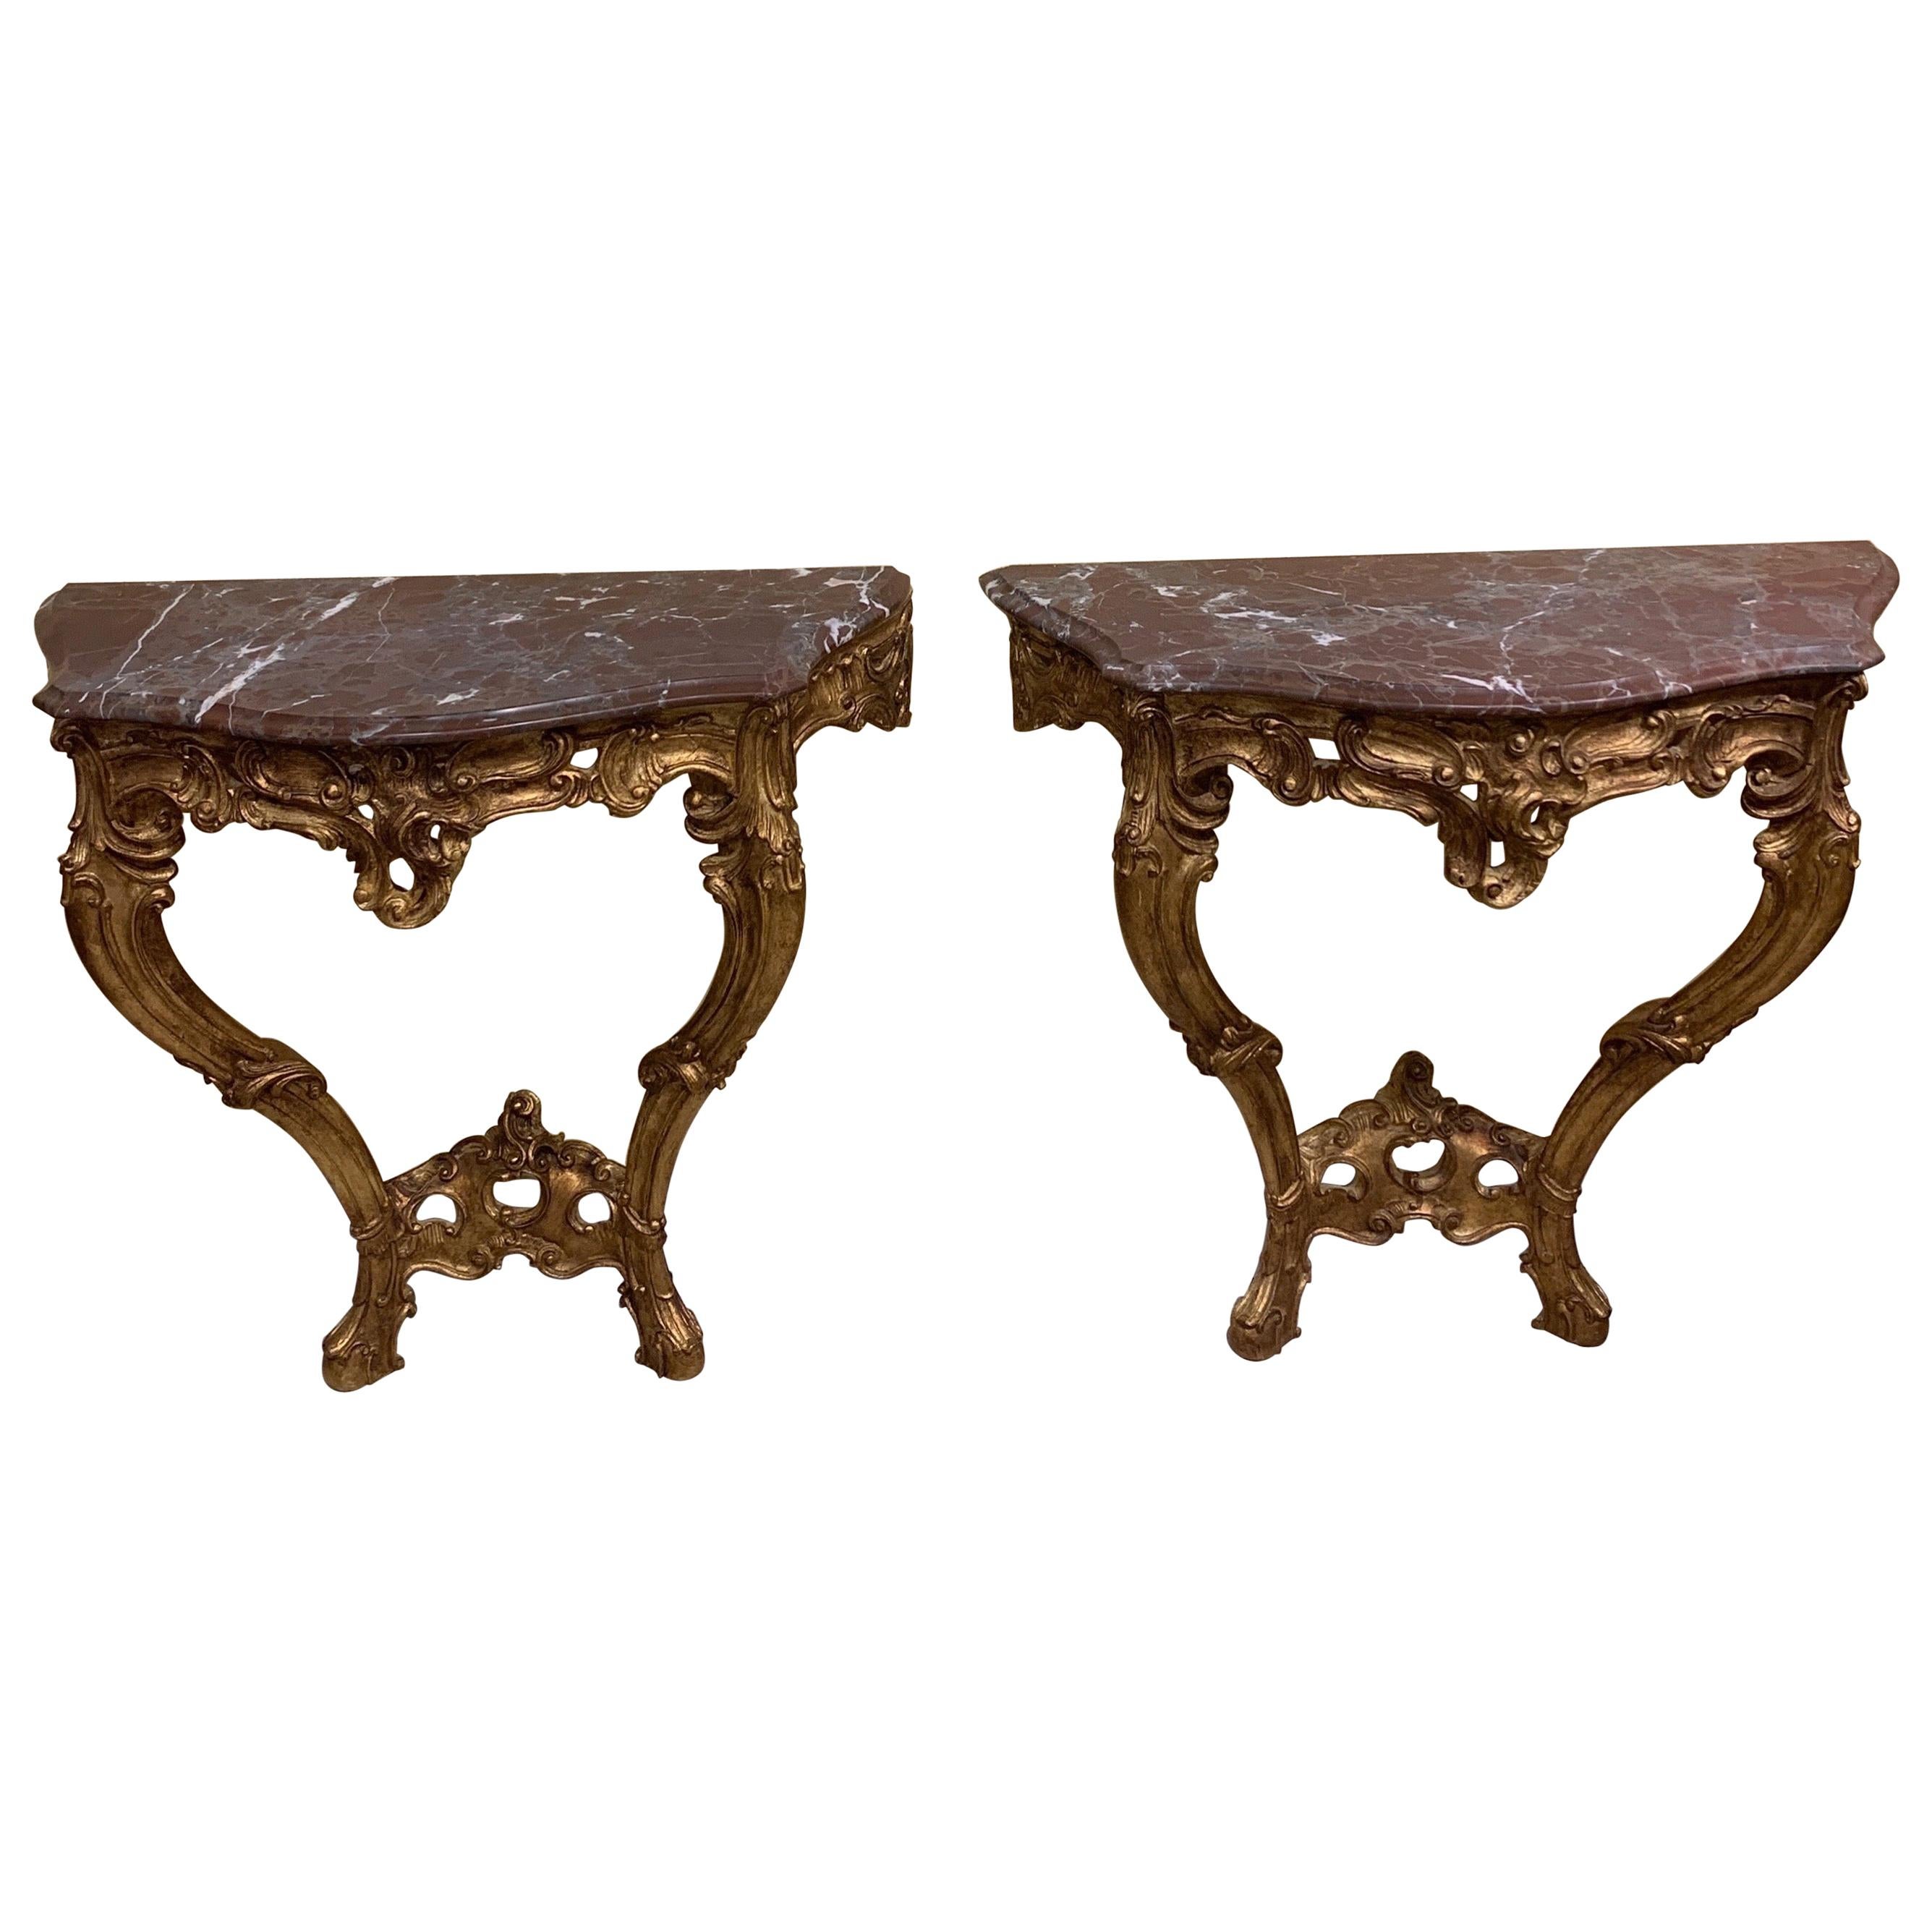 Pair of French Carved and Gilt Rococo Style Marble Top Consoles